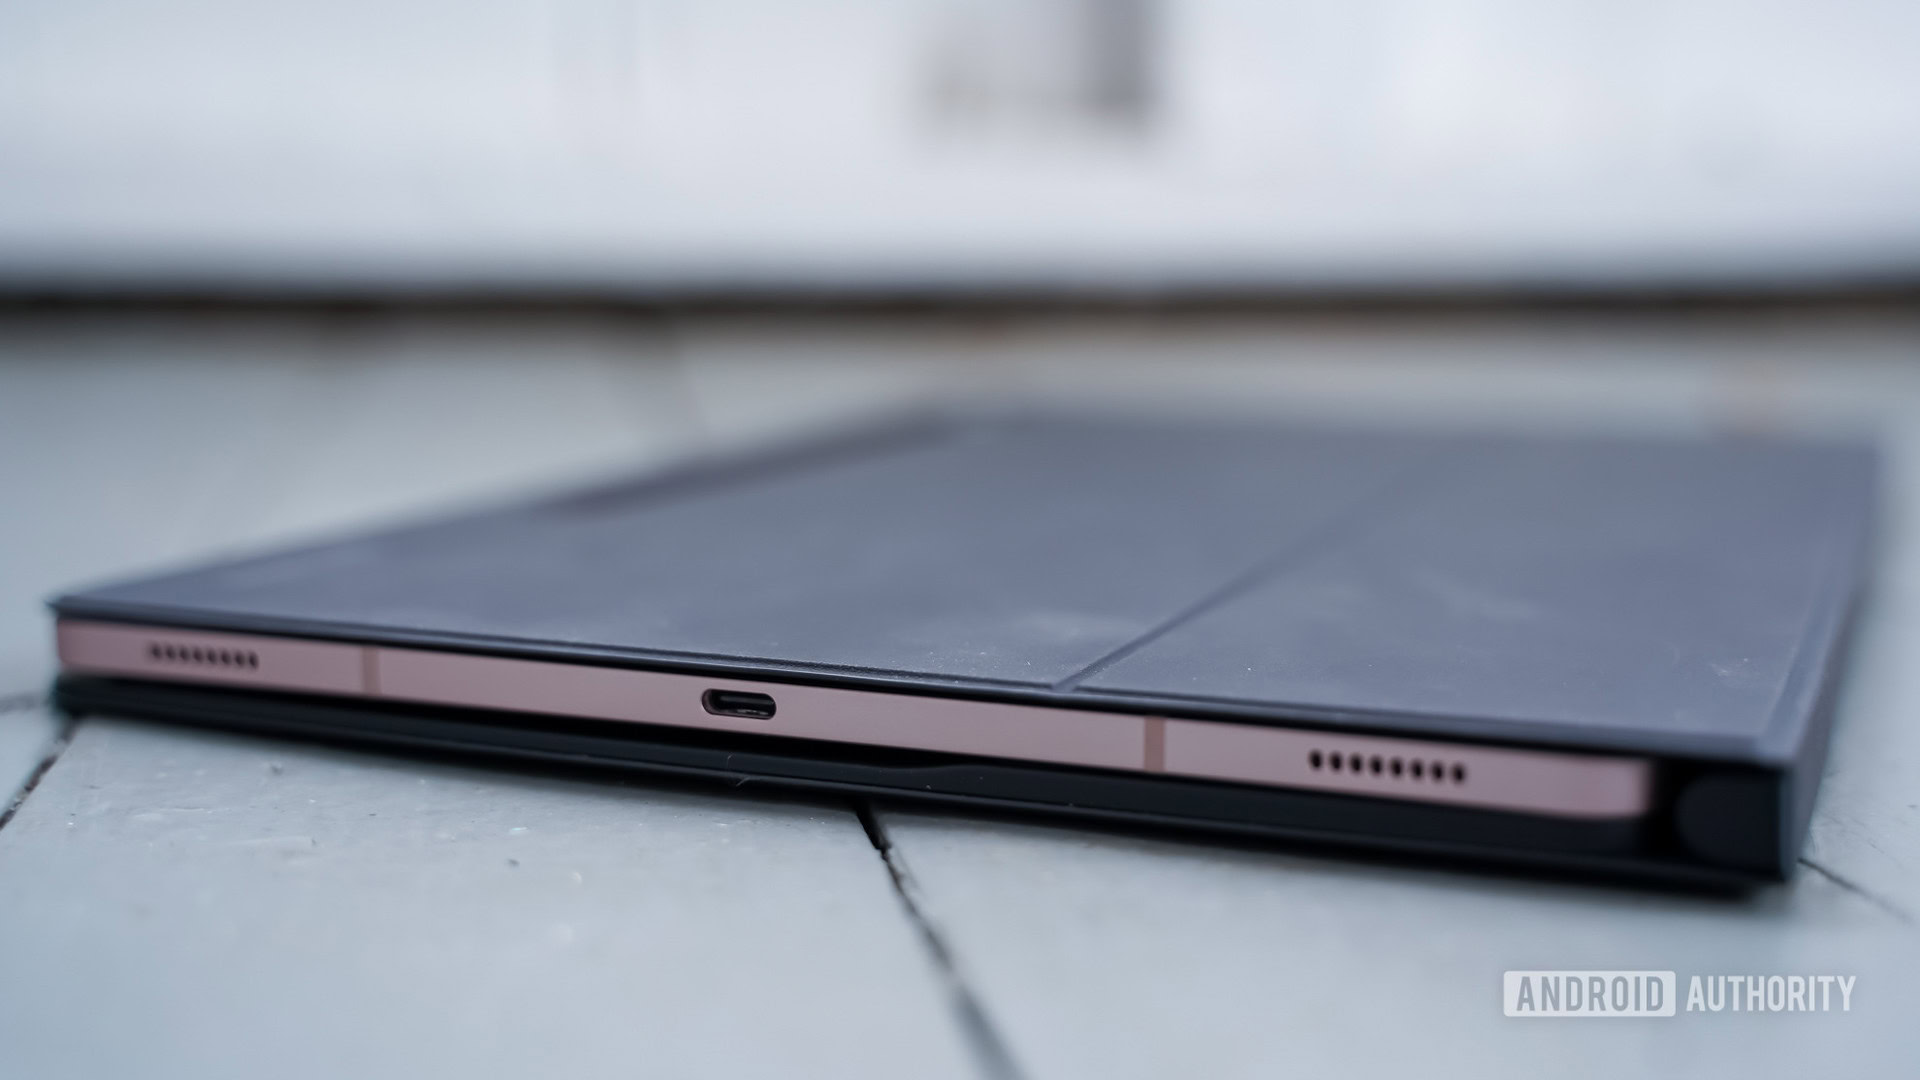 Samsung Galaxy Tab S8 Plus profile with keyboard cover